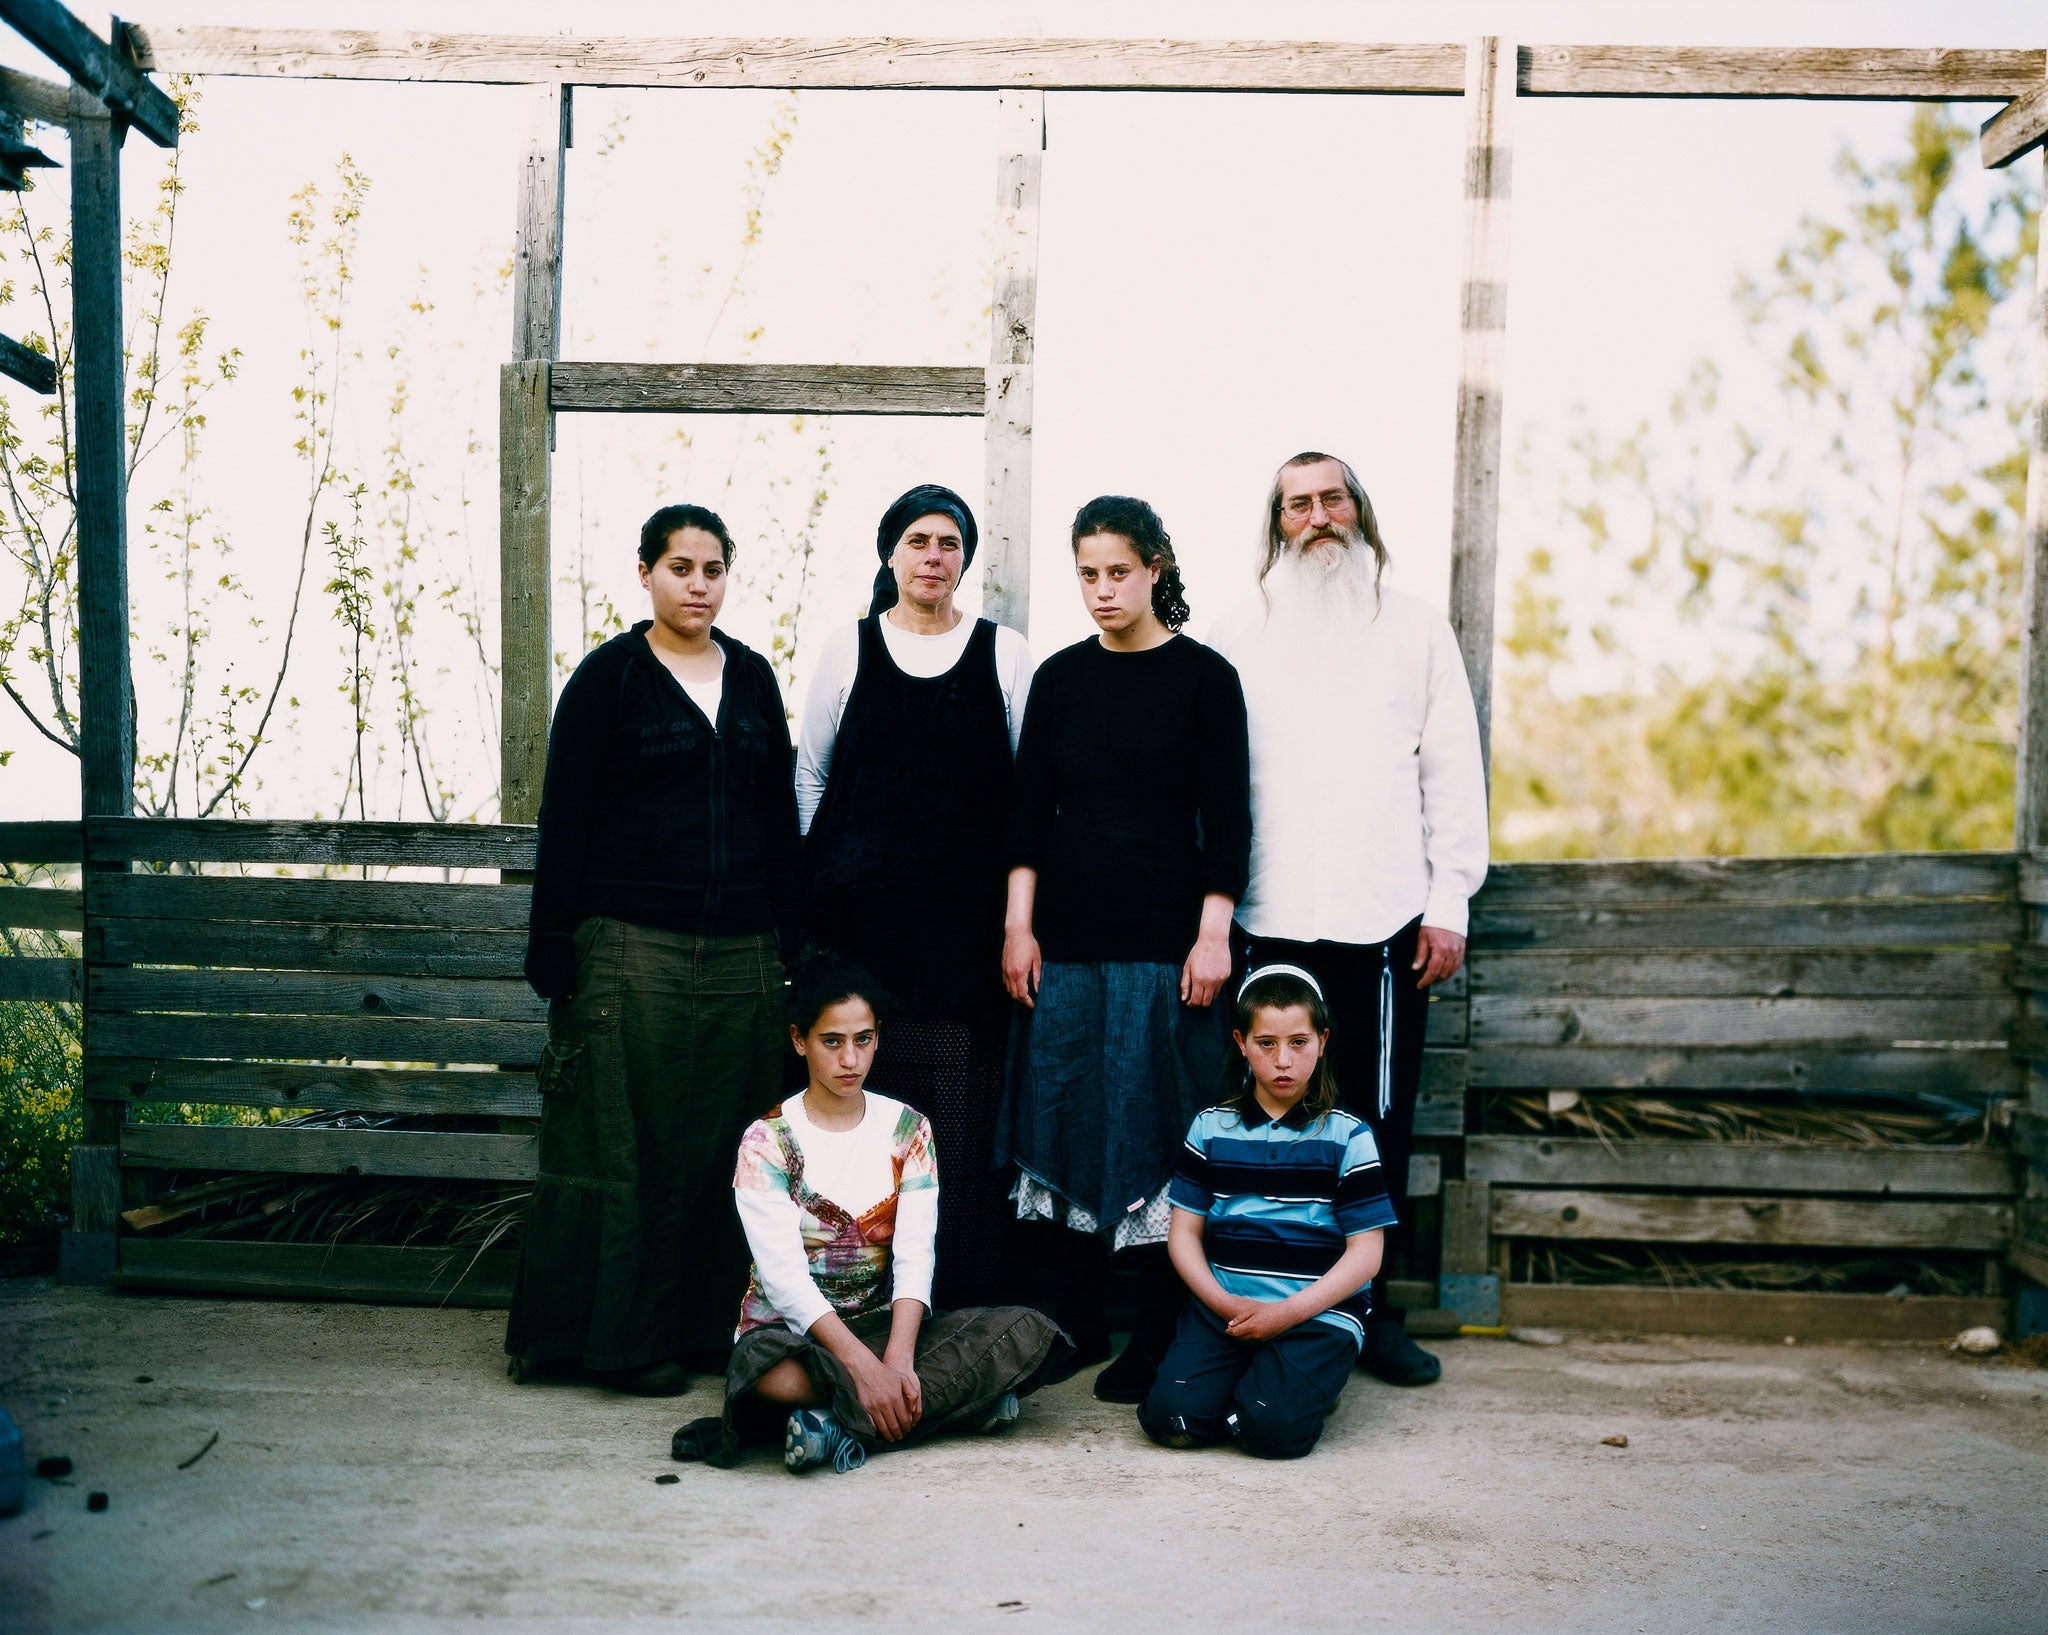 'This is Bat Ayin; the wooden structure the family are standing in front of is for the Sukkot festival: for seven days the family must eat outside'